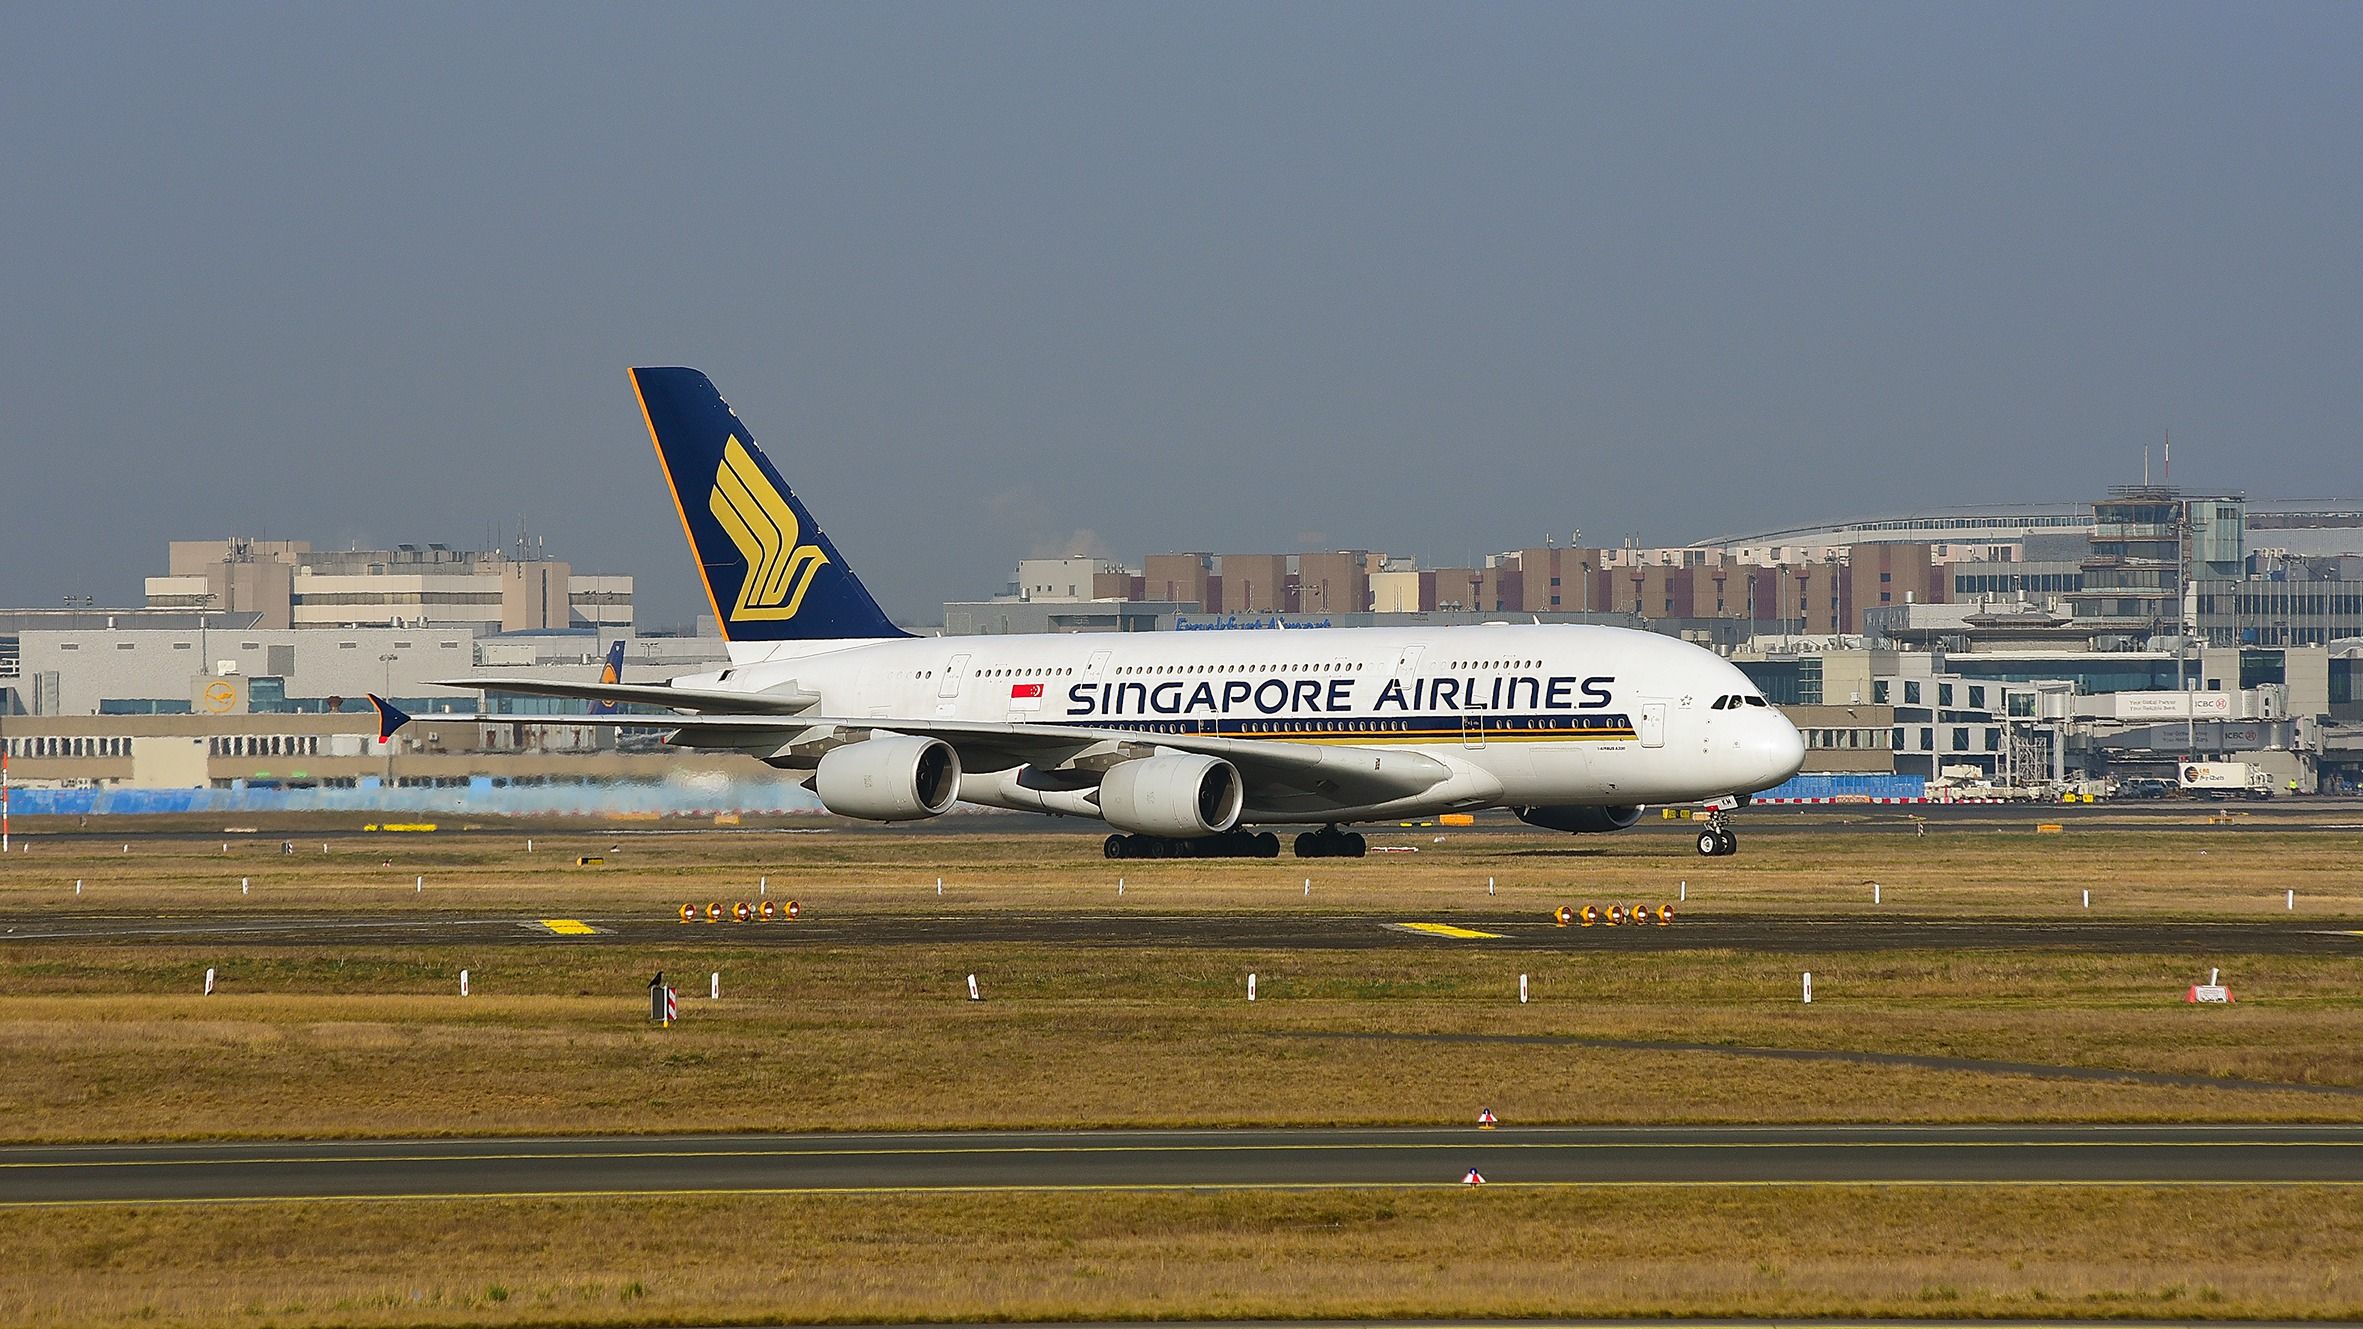 Singapore Airlines Airbus A380 on the runway at Frankfurt Airport FRA-1